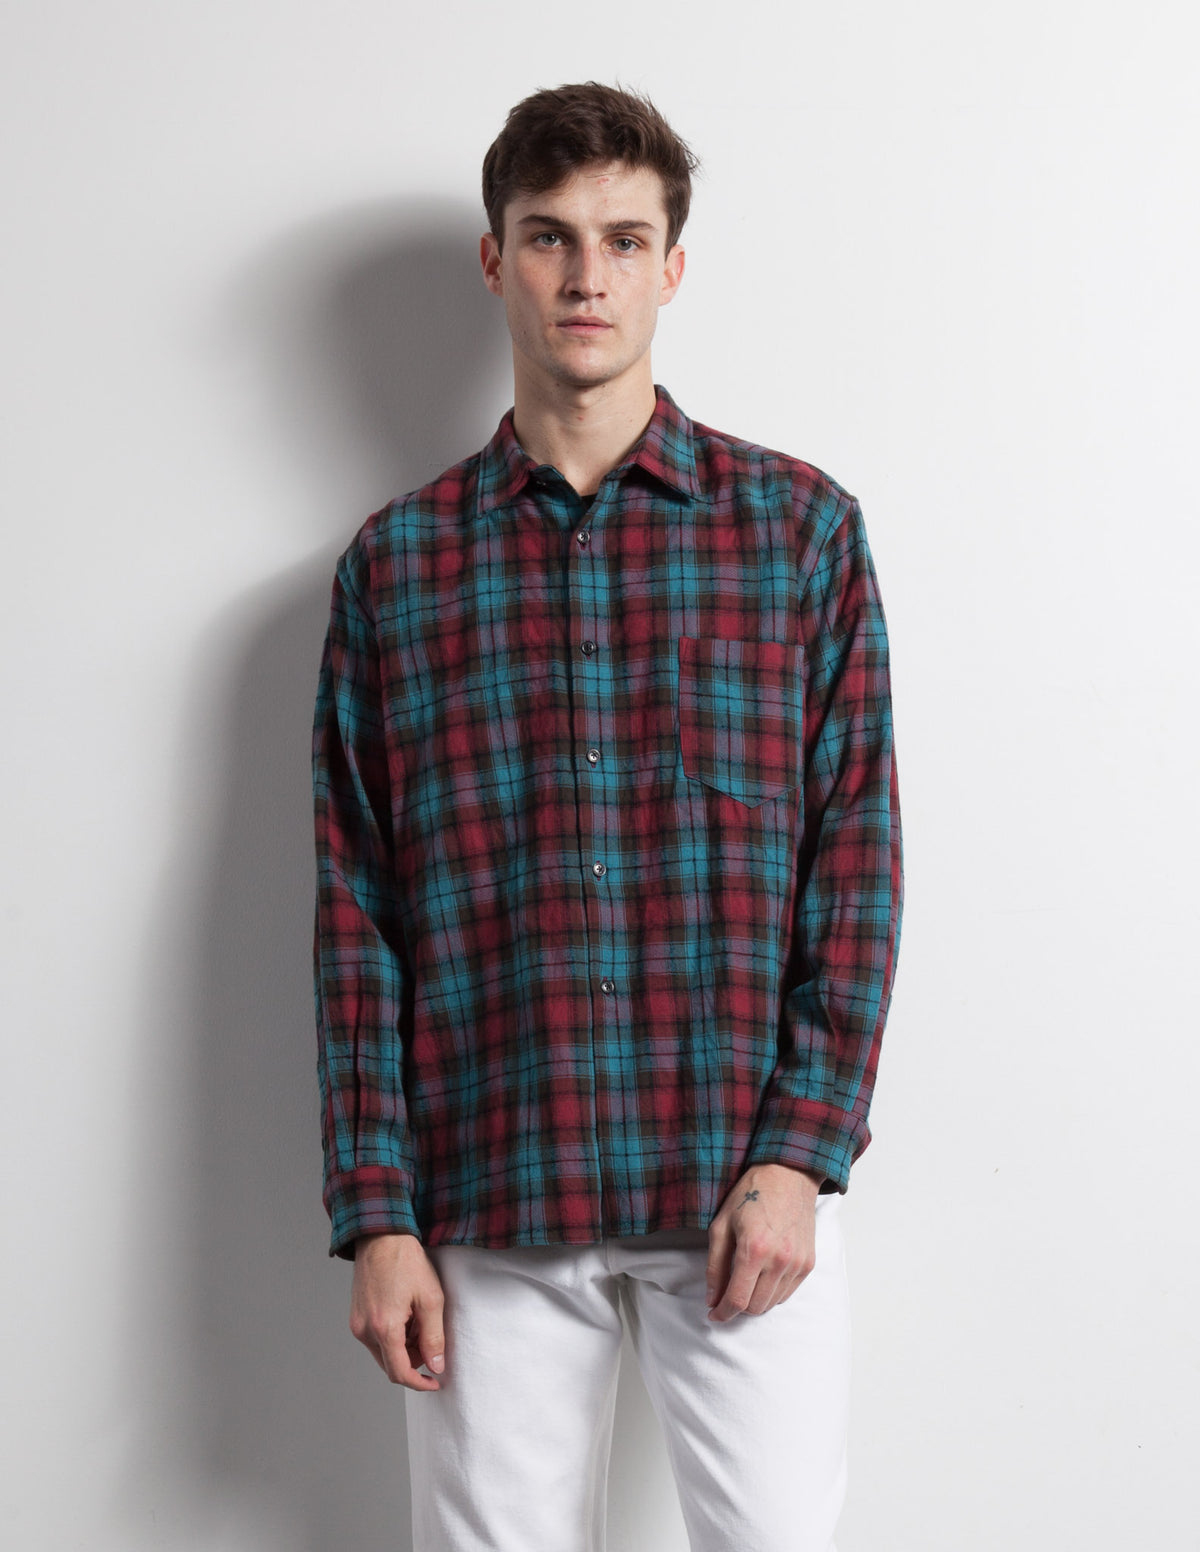 Kapatid - Men's Teal Plaid Flannel Shirt Made in the USA